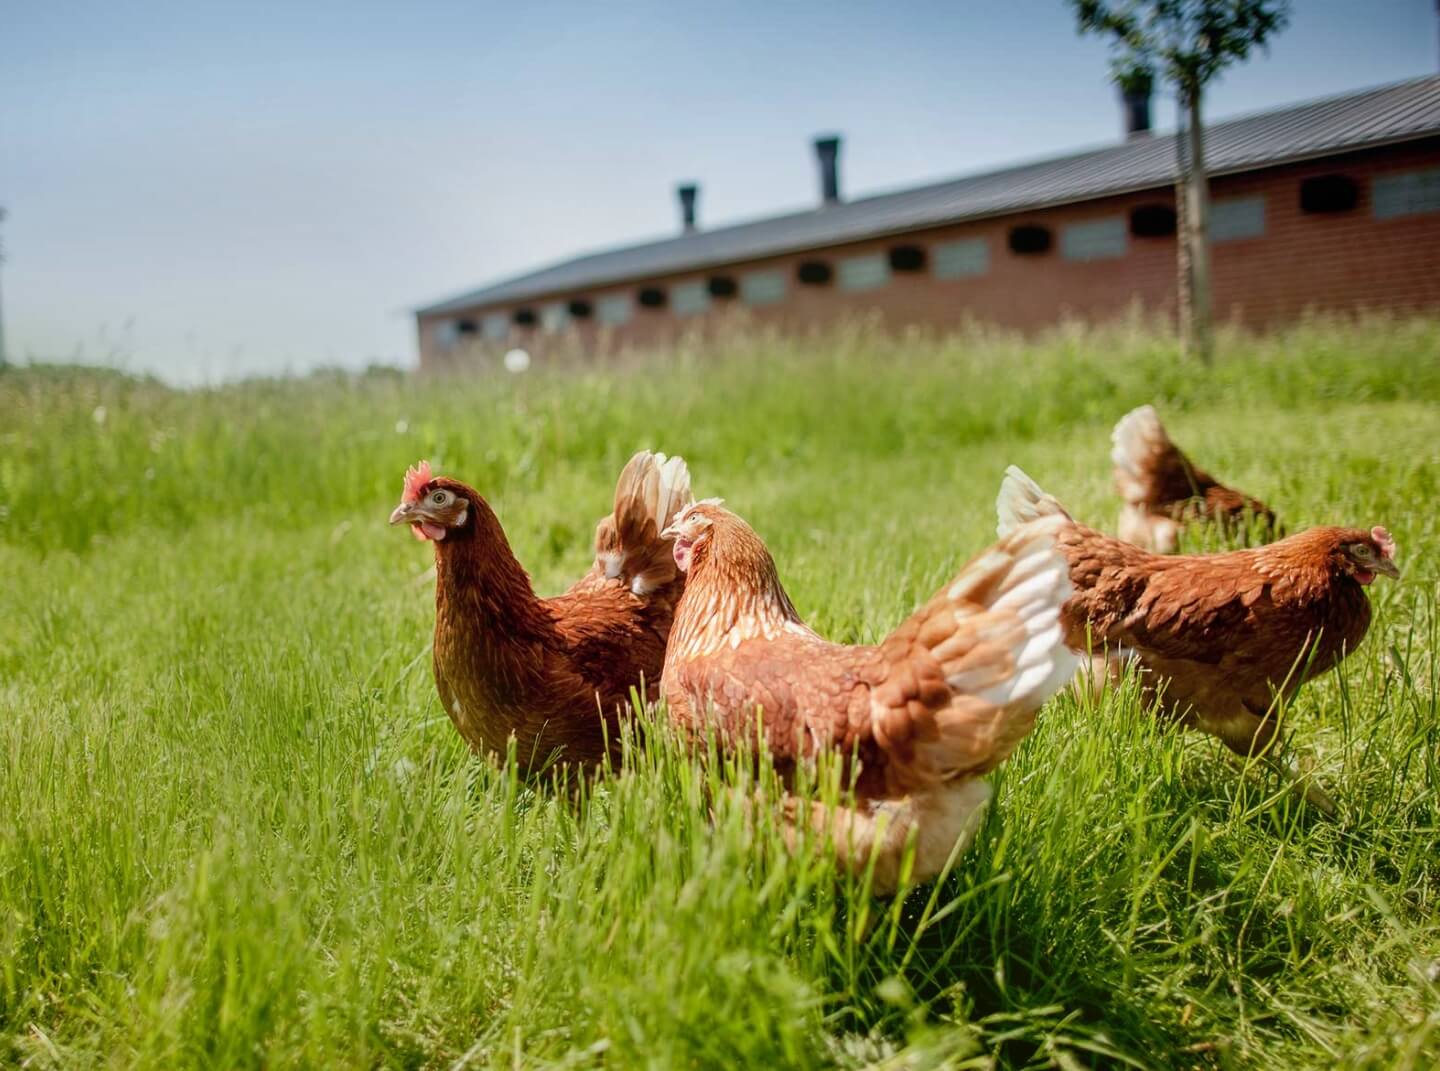 Four chickens peck at the ground in a meadow in front of a coop building